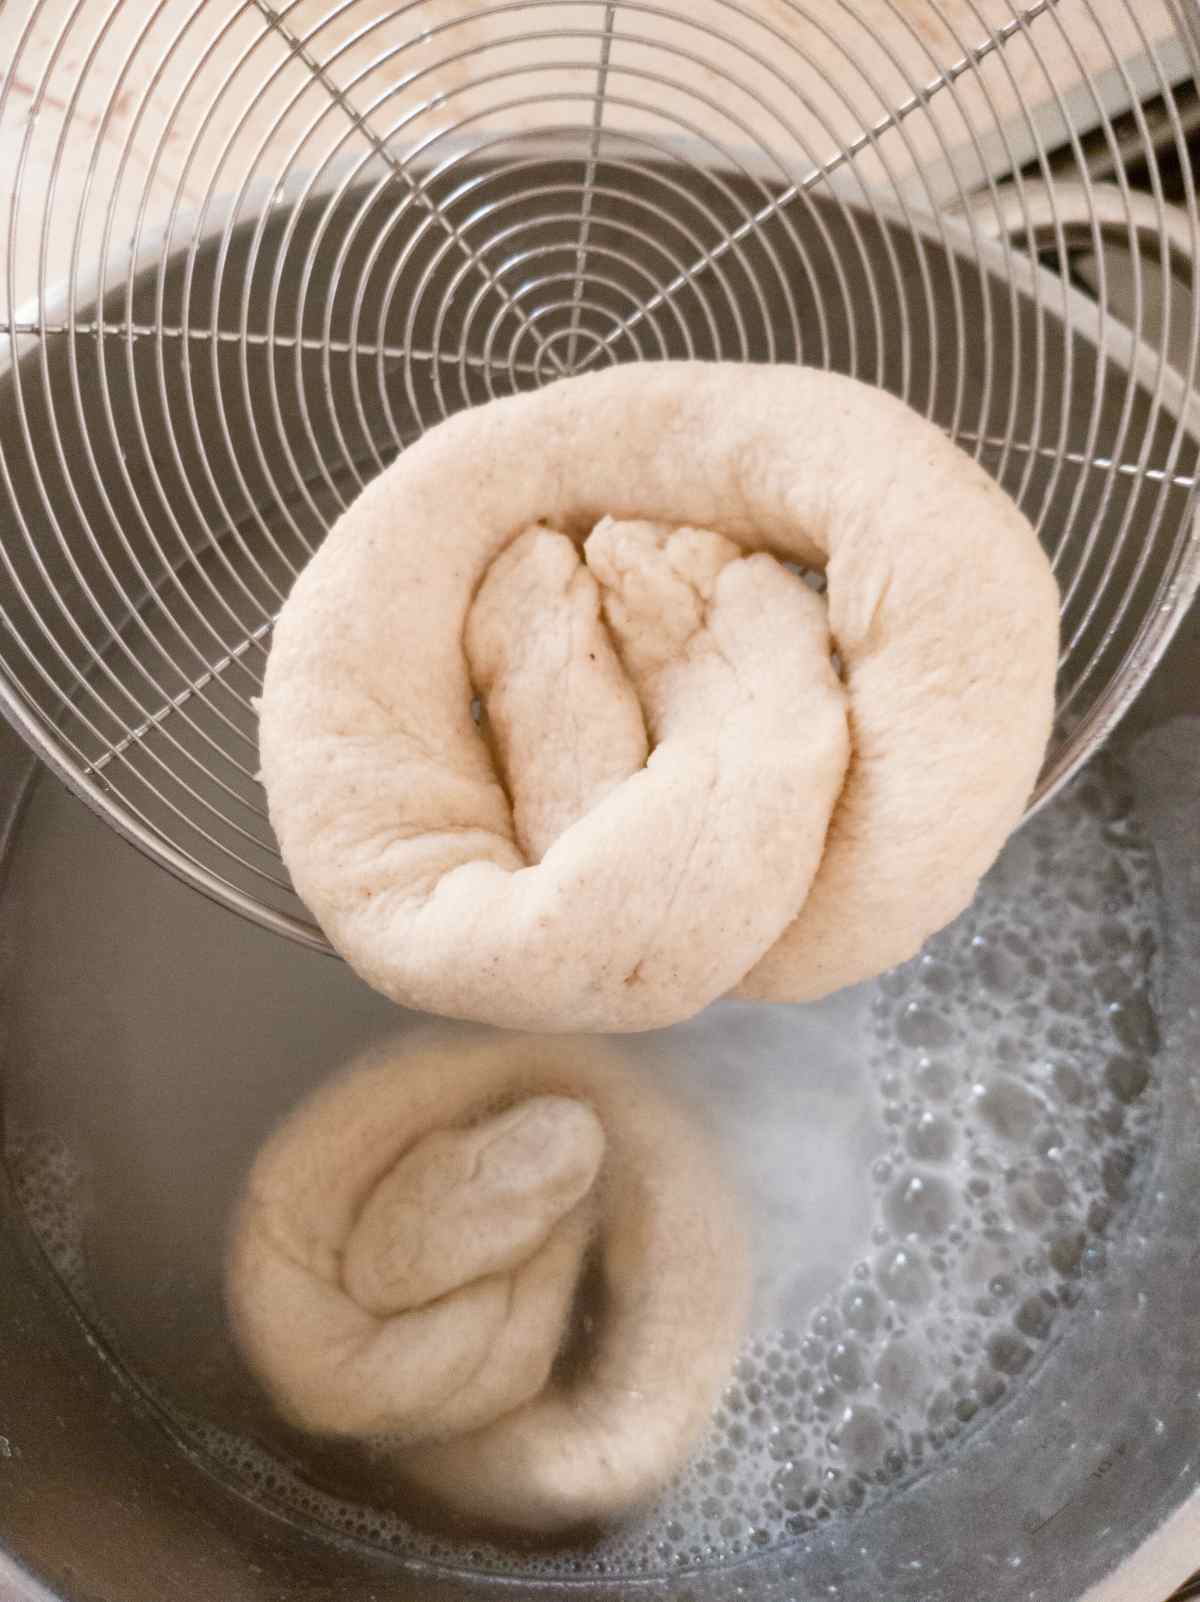 A pretzel in a spider strainer over a water bath.